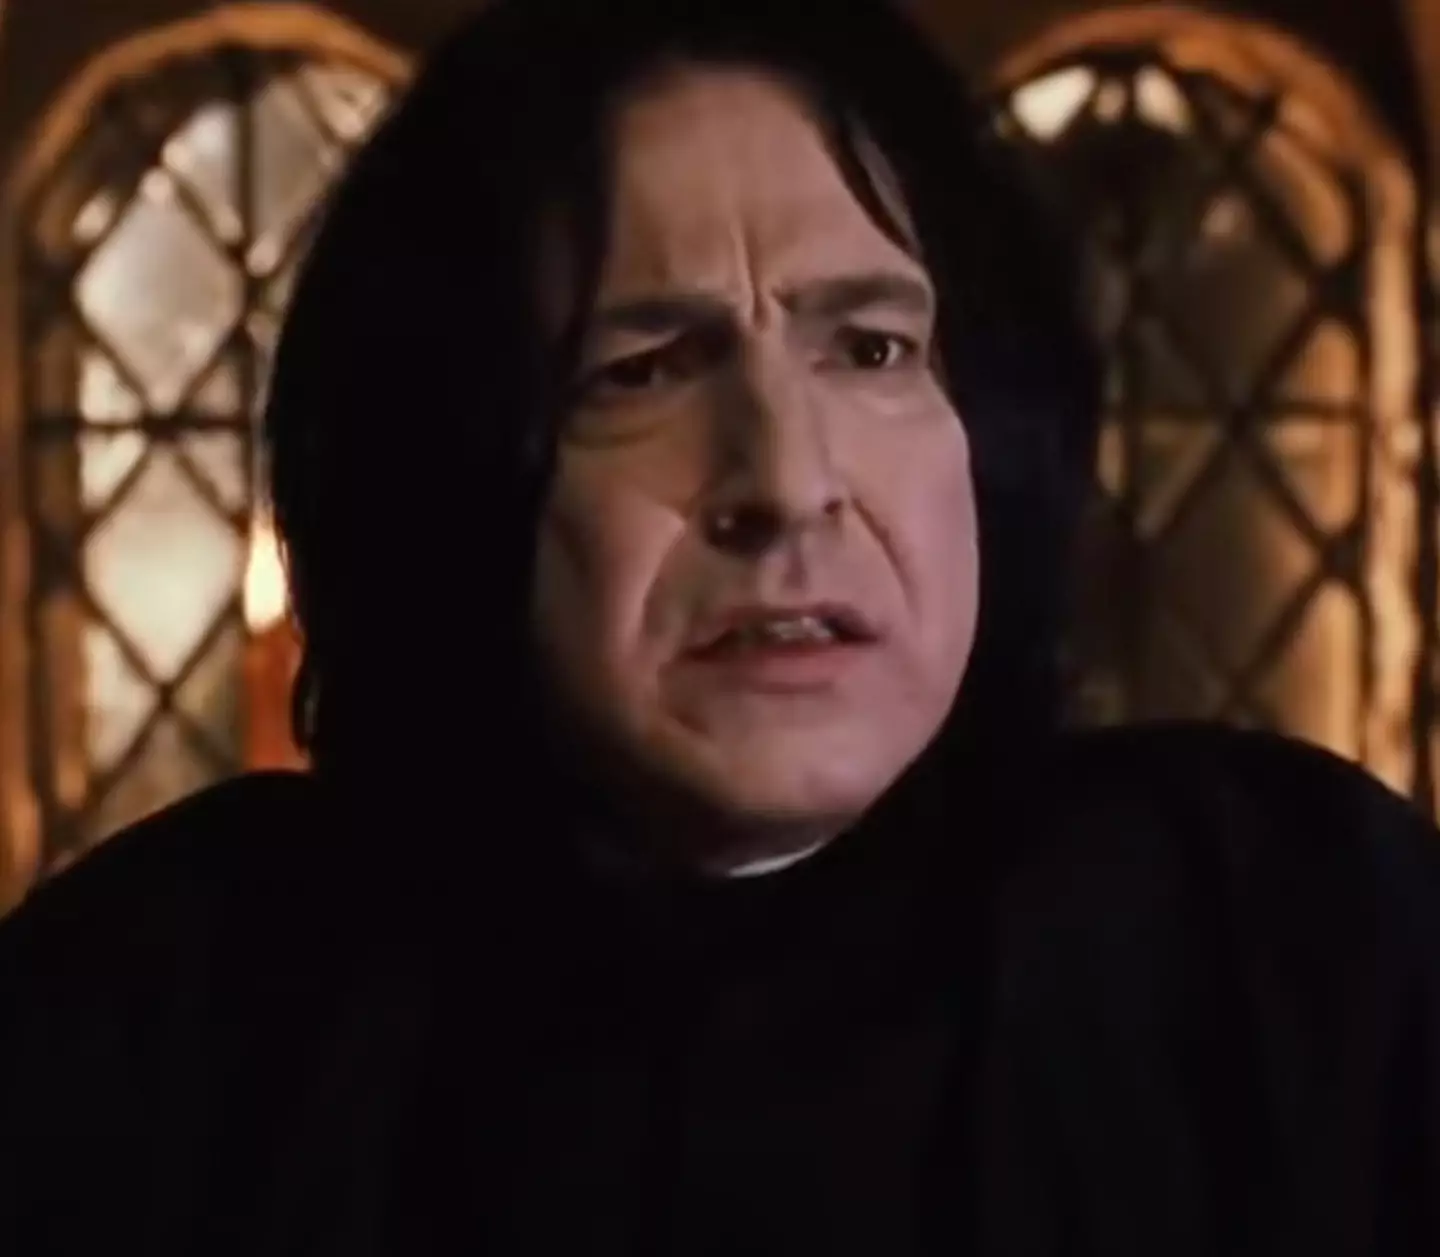 Alan Rickman was the perfect actor to play Snape (Warner Bros)